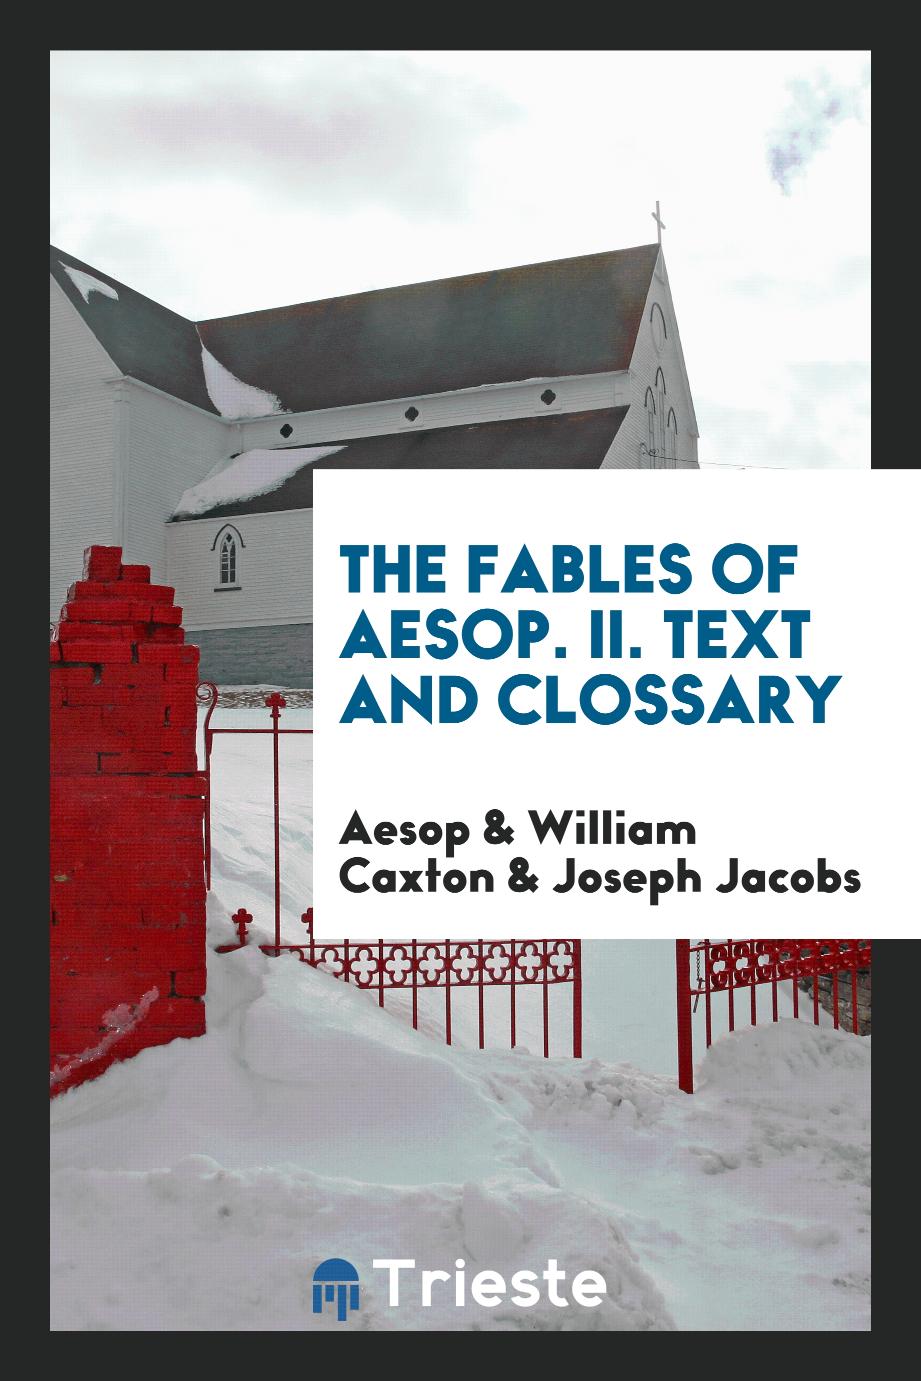 The Fables of Aesop. II. Text and Clossary